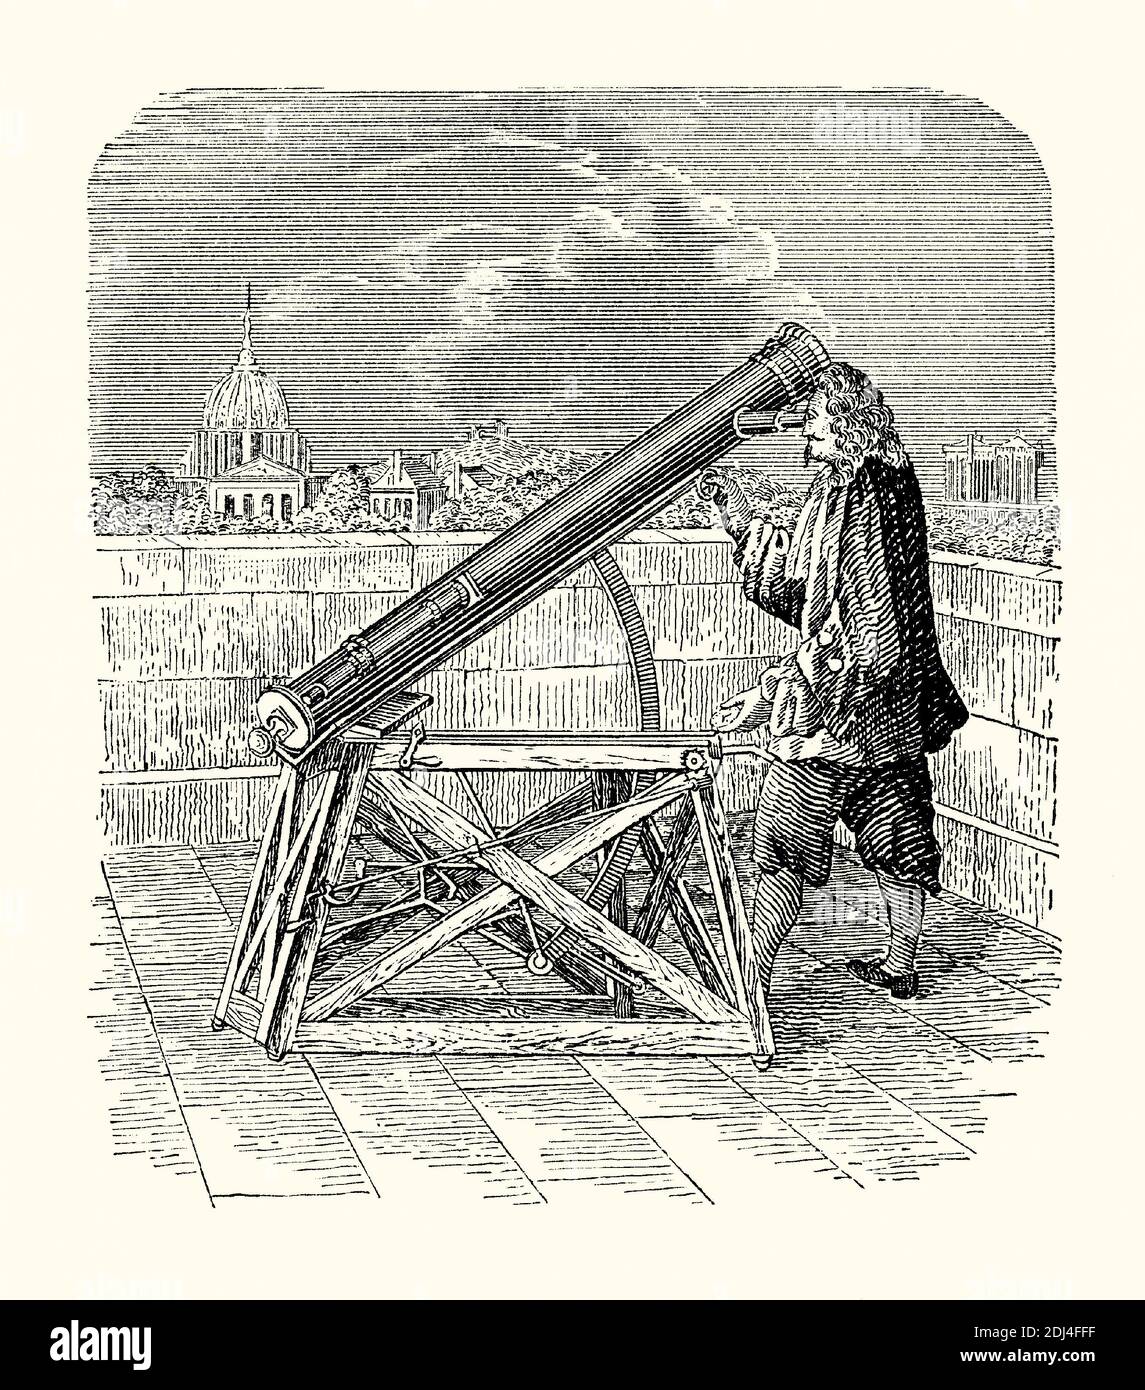 An Old Engraving Showing Isaac Newton And His Reflecting Telescope London England Uk C 1670 7783